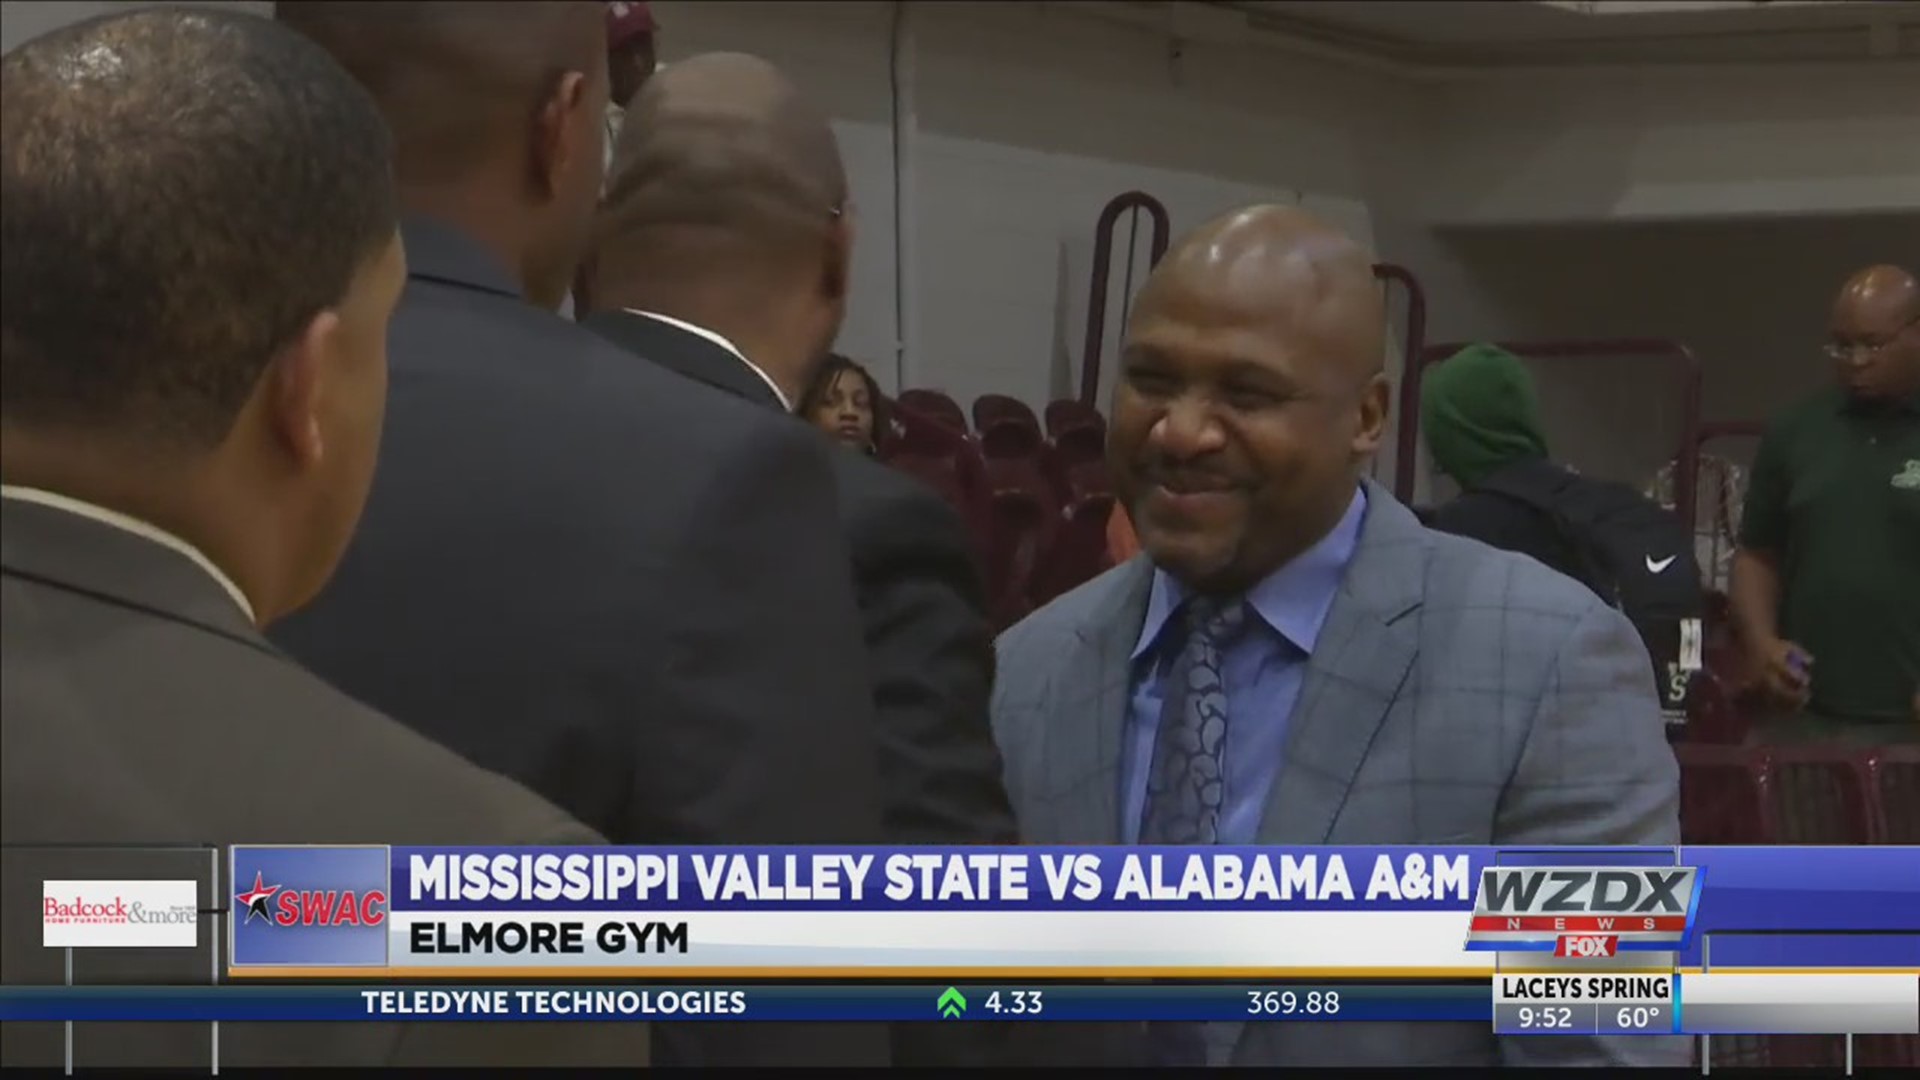 Mississippi Valley State took a 14 point lead into the locker room and never allowed Alabama A&M to gain the lead in a 72-66 contest Monday night in Huntsville. This loss was the first time that Alabama A&M has tasted defeat inside Elmore Gym this season. Caleb Hunter led all scorers with 19 points. Cam Tucker led Alabama A&M with 13.